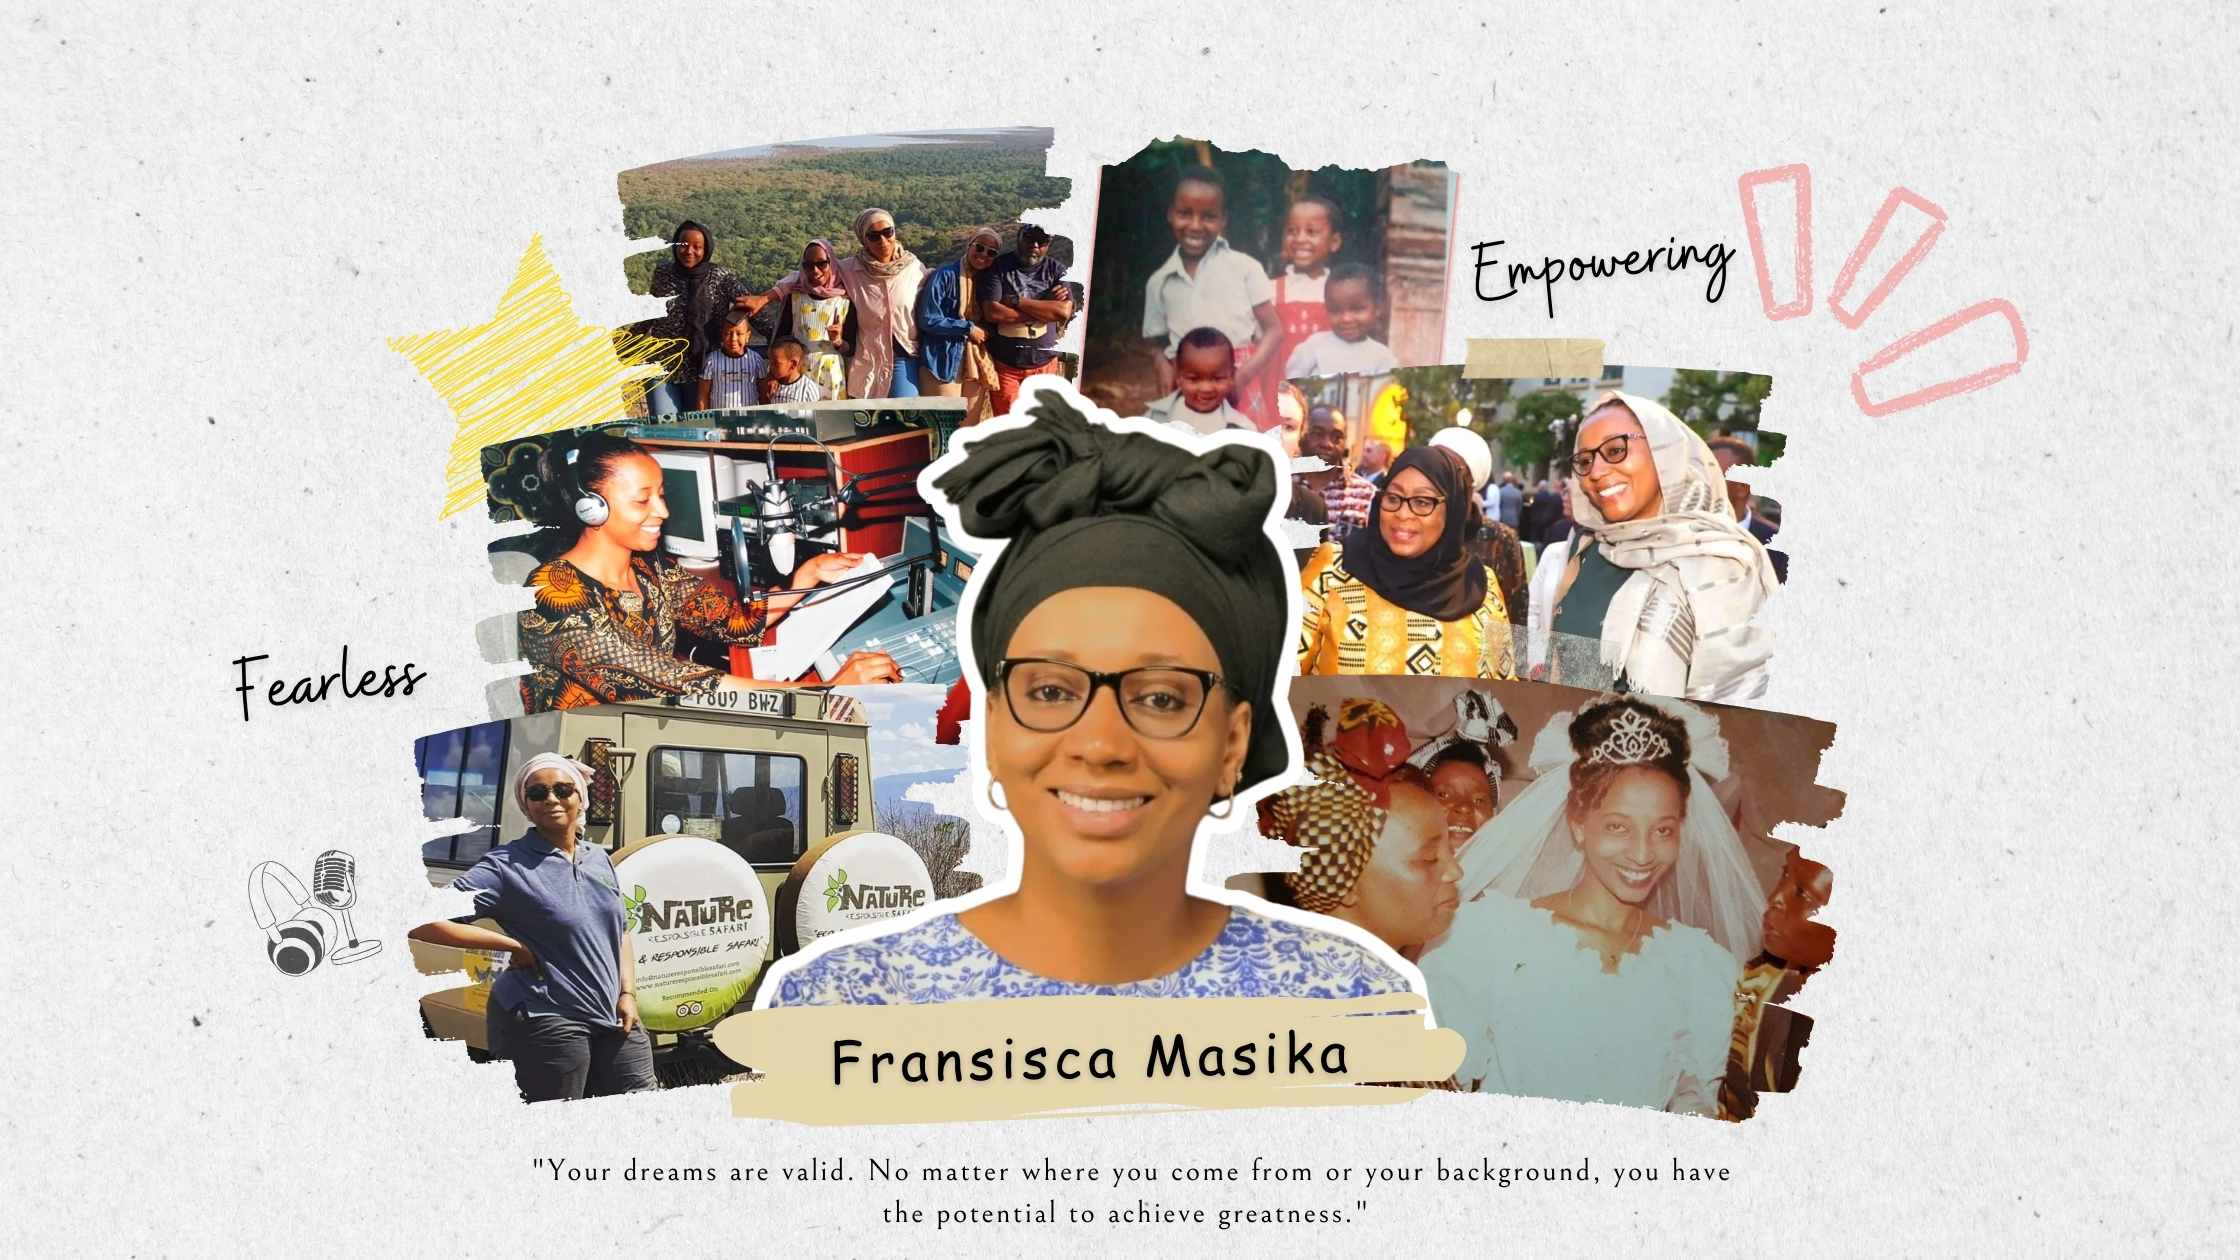 Pictures of Fransisca Masika from Nature Responsible Safari, Tanzania and her journey in hospitality industry